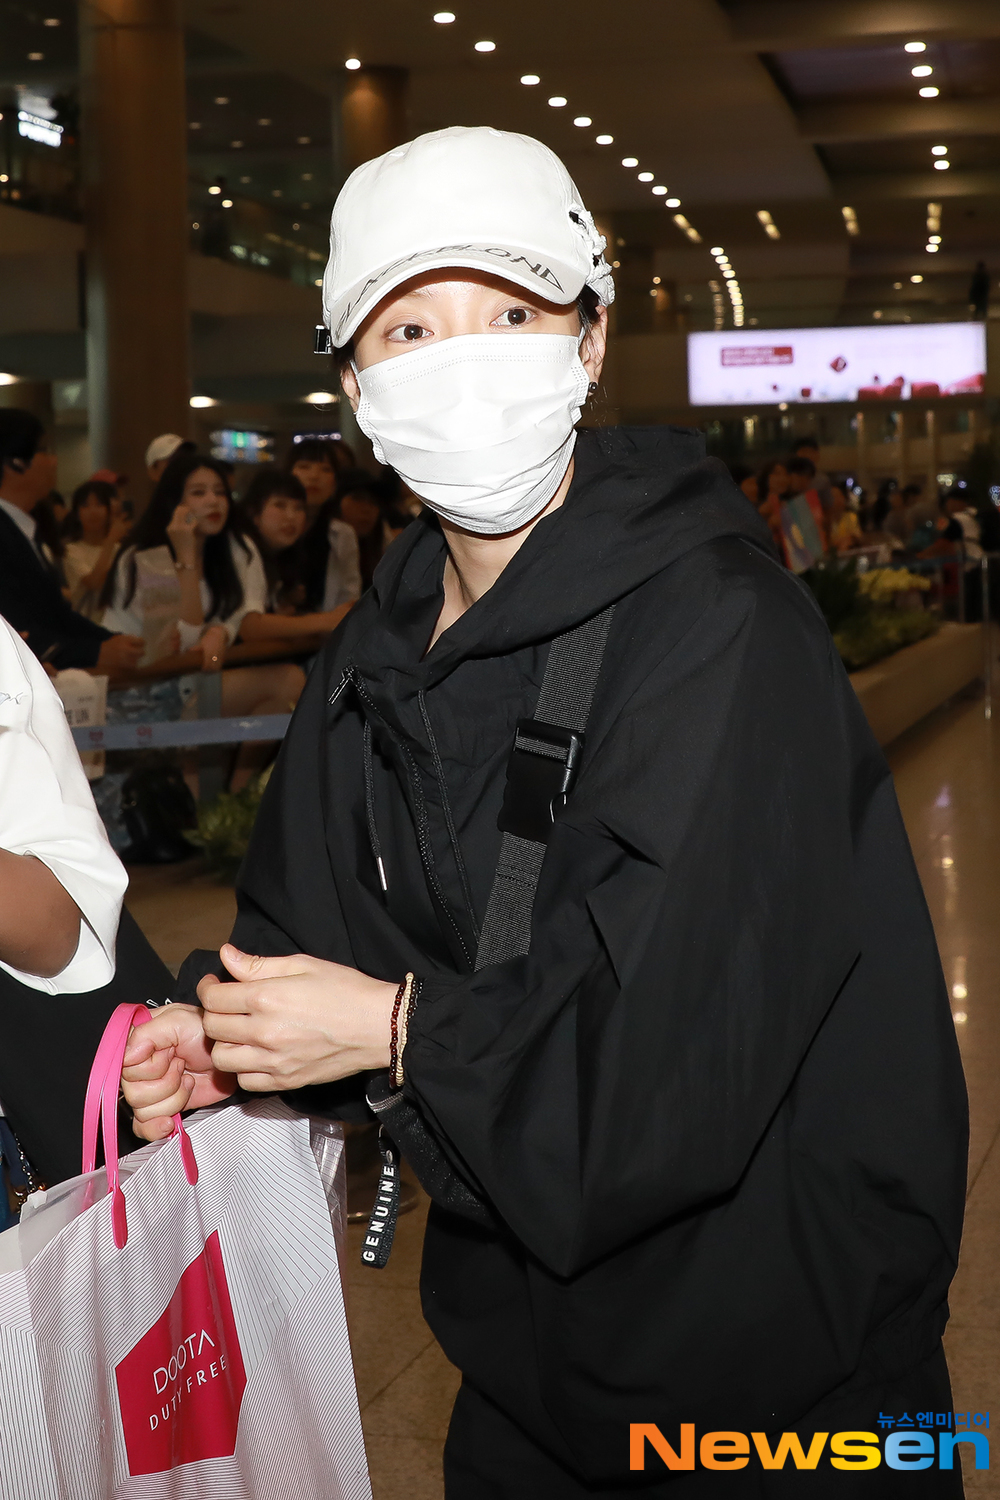 Song Ji-hyo arrived at the Inchon International Airport in Unseo-dong, Jung-gu, Incheon after finishing the overseas schedule of RUNNINGMAN FAN MEETING IN JAKARTA INDONESIA held in Indonesia on August 18th.Song Ji-hyo is leaving the arrivals hall.#Running Man #Running ManIncheon Airport #Airport Fashion #ICNAirportkim ki-tae